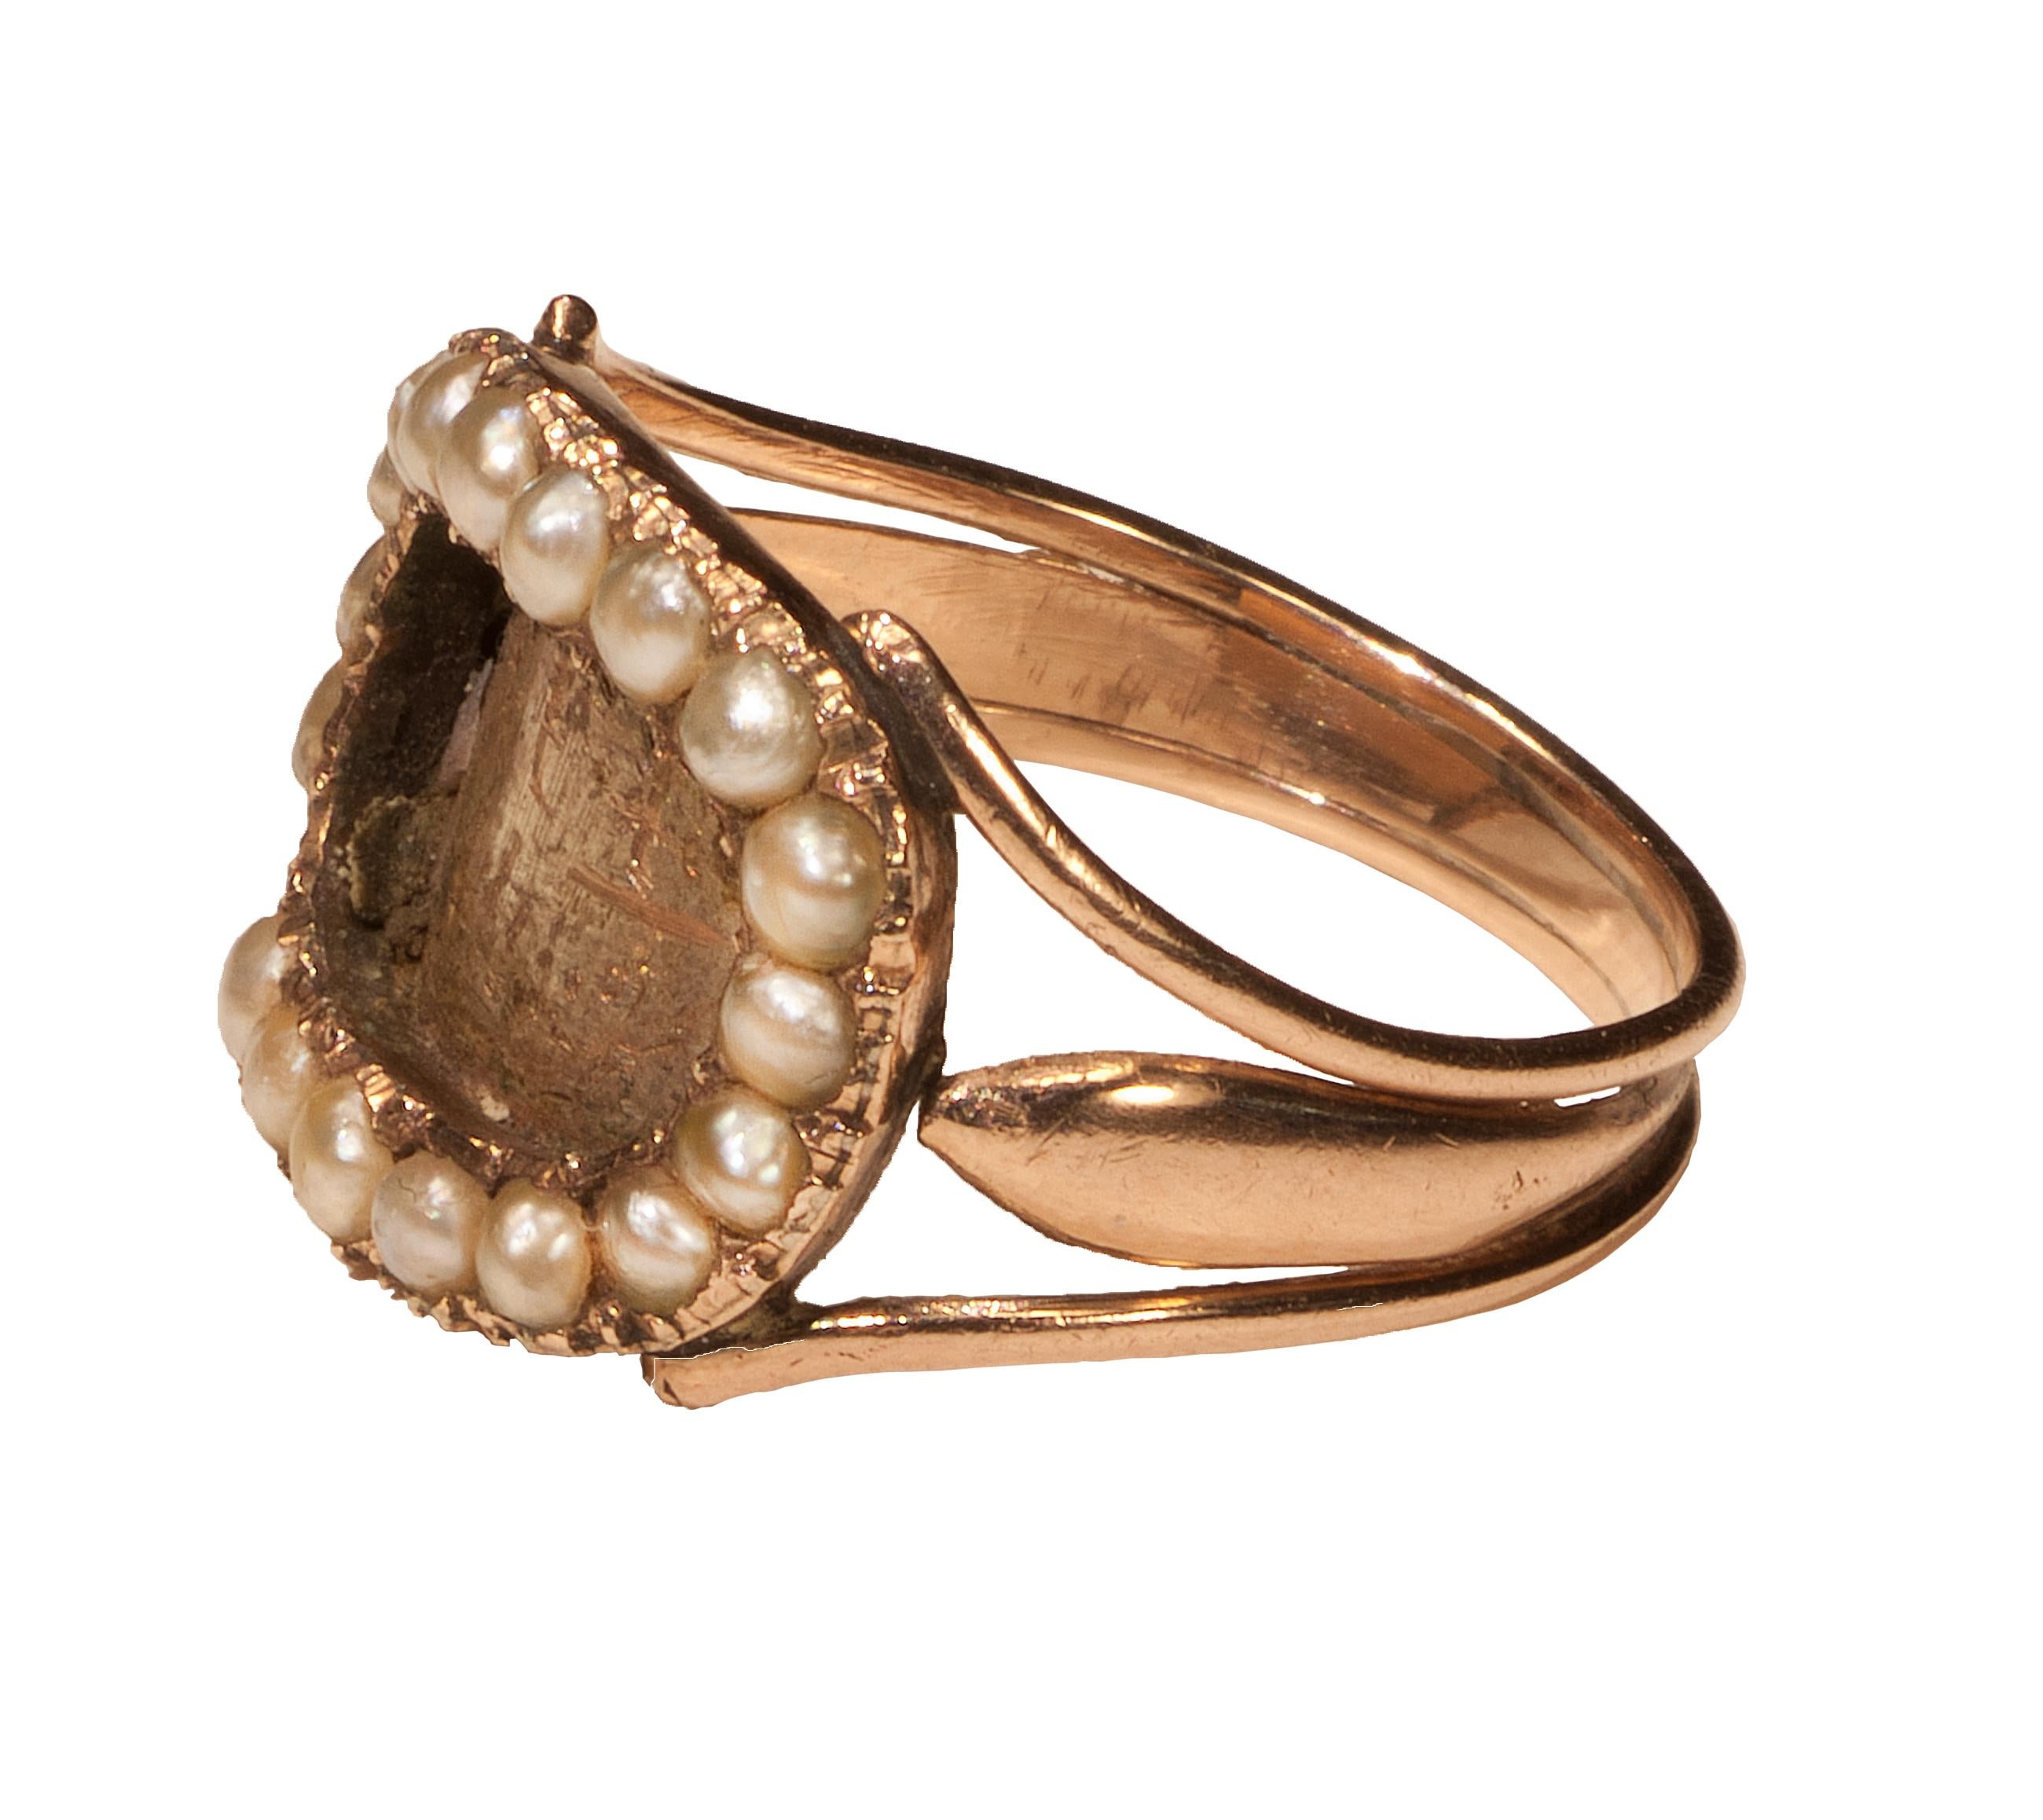 RING AS TOKEN OF LOVE
England or America, about 1800-1820
Rose gold, pearls
Weight 3 gr.; circumference: 56.45 mm.; US size 7.75; UK size P 1/2

The expression of love and friendship is universal in life as in death, and hair mementoes were not